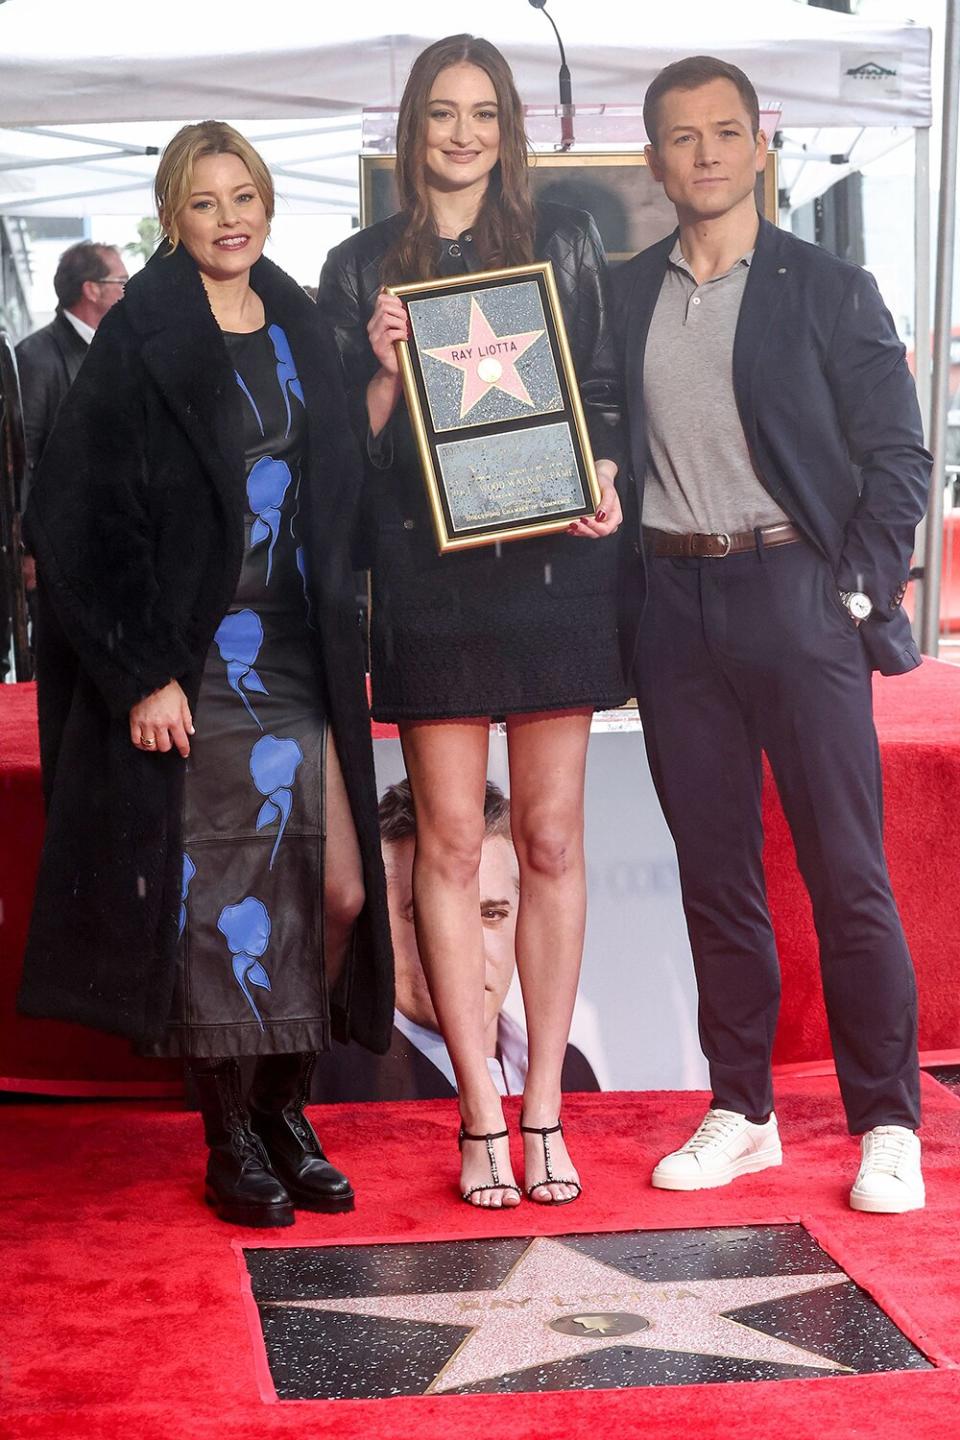 (L-R) Elizabeth Banks, Karsen Liotta and Taron Egerton Ray Liotta honored with a star on the Hollywood Walk of Fame, Los Angeles, California